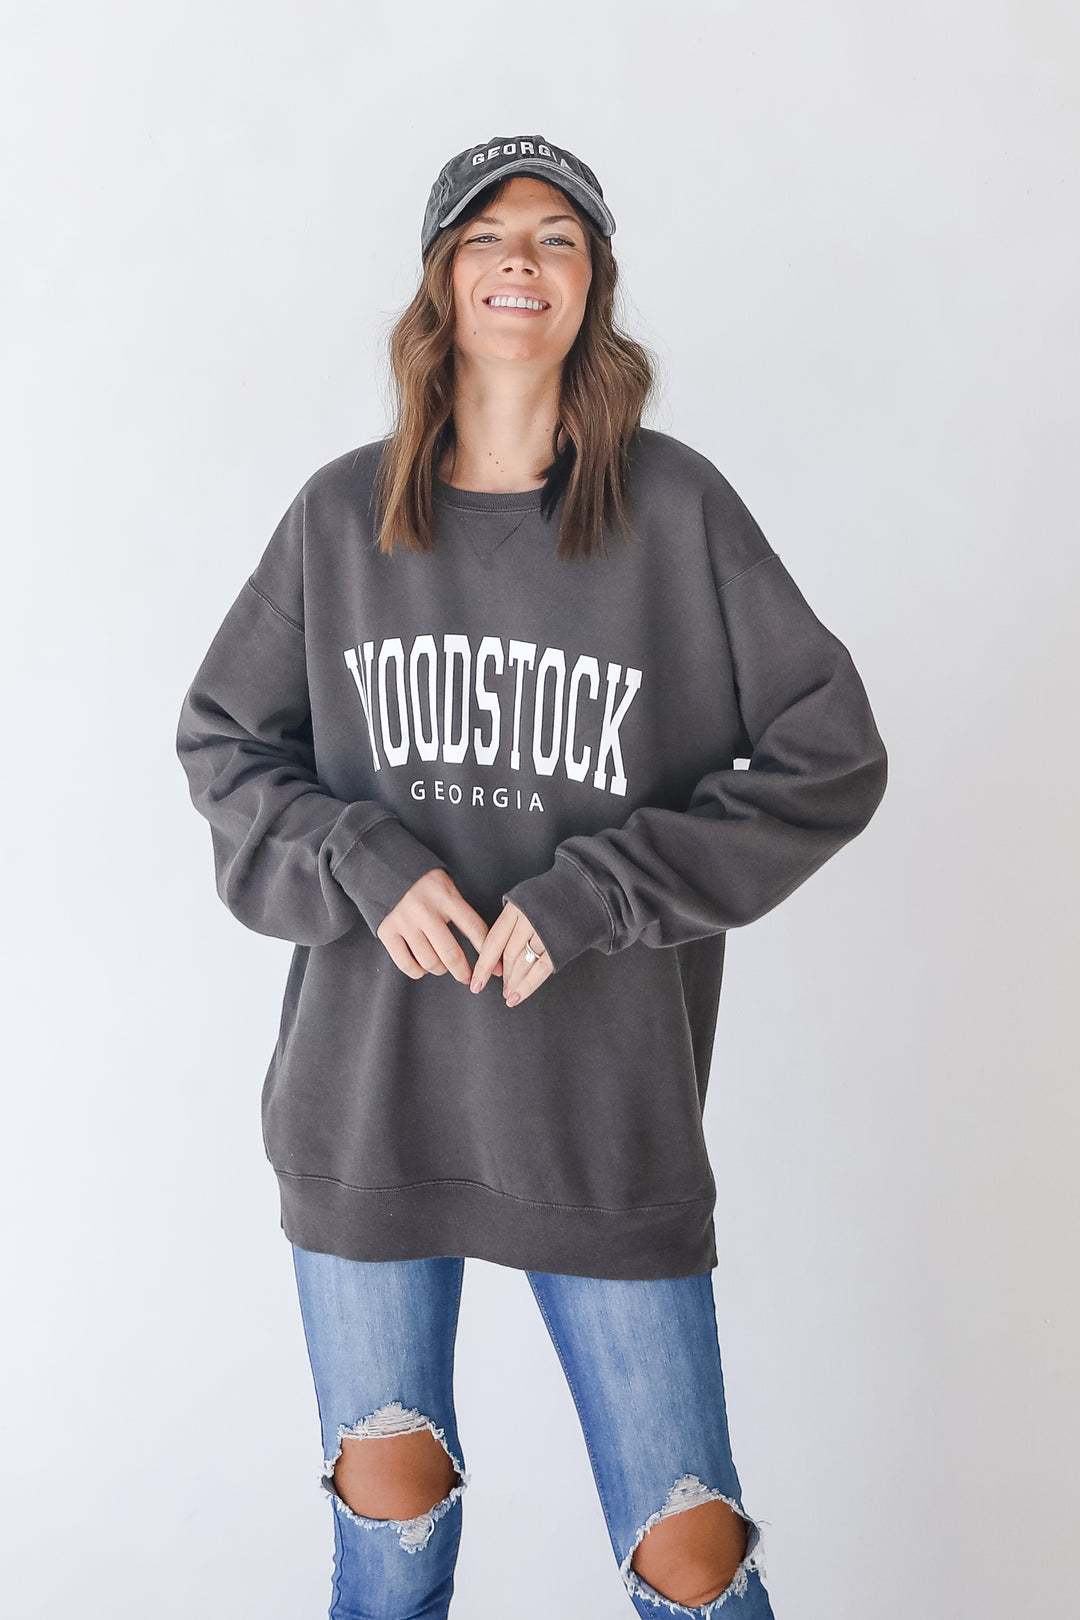 Woodstock Georgia Pullover front view